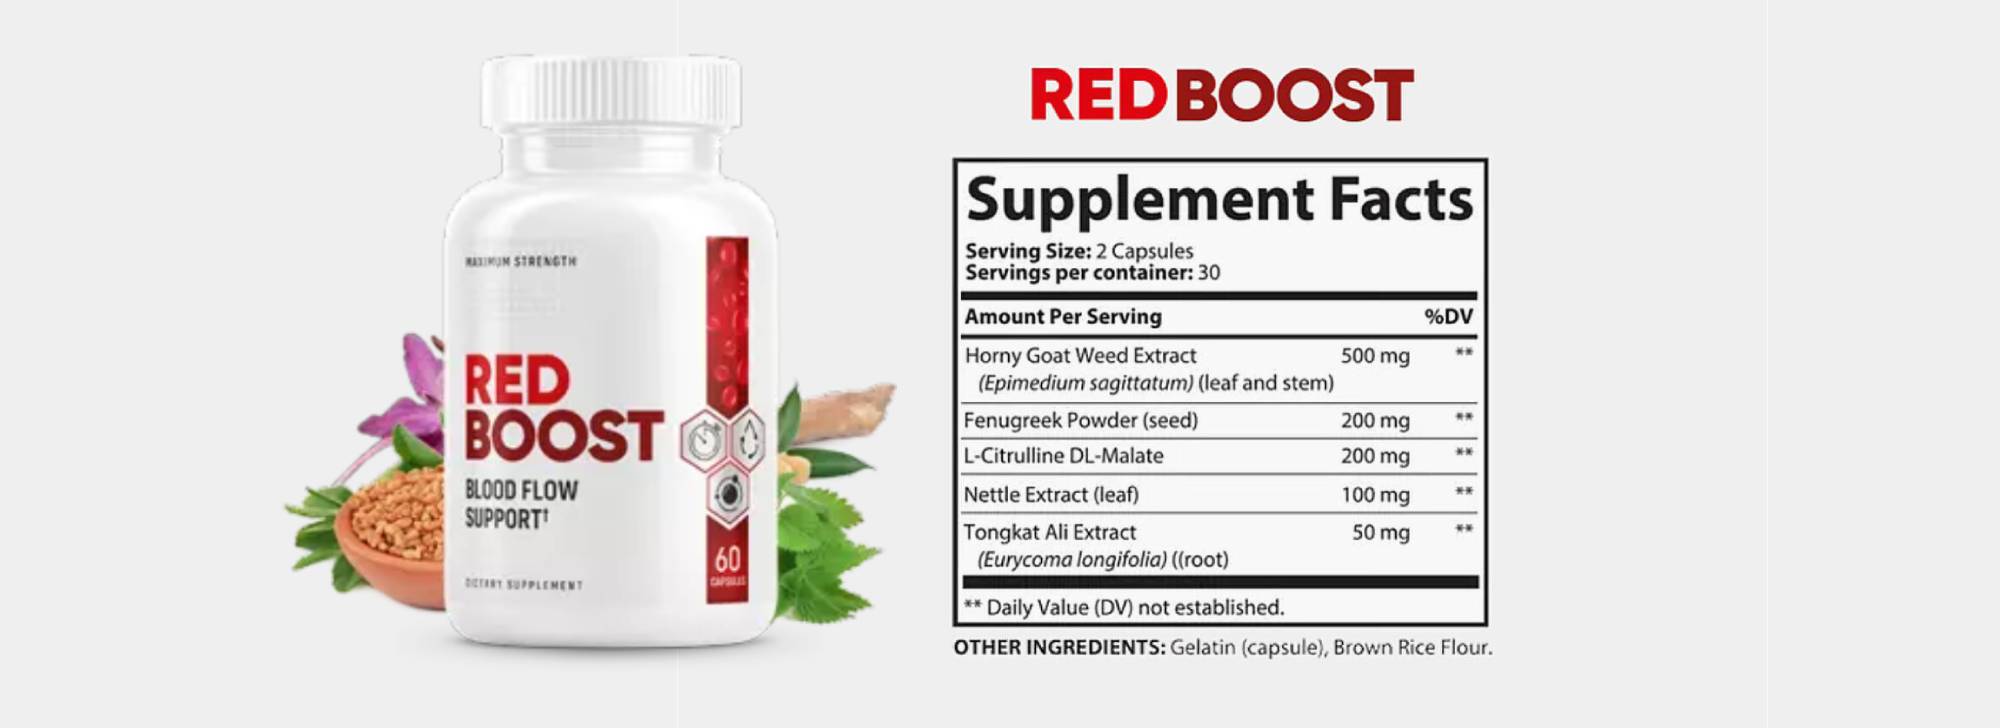 Red Boost Supplement Fact